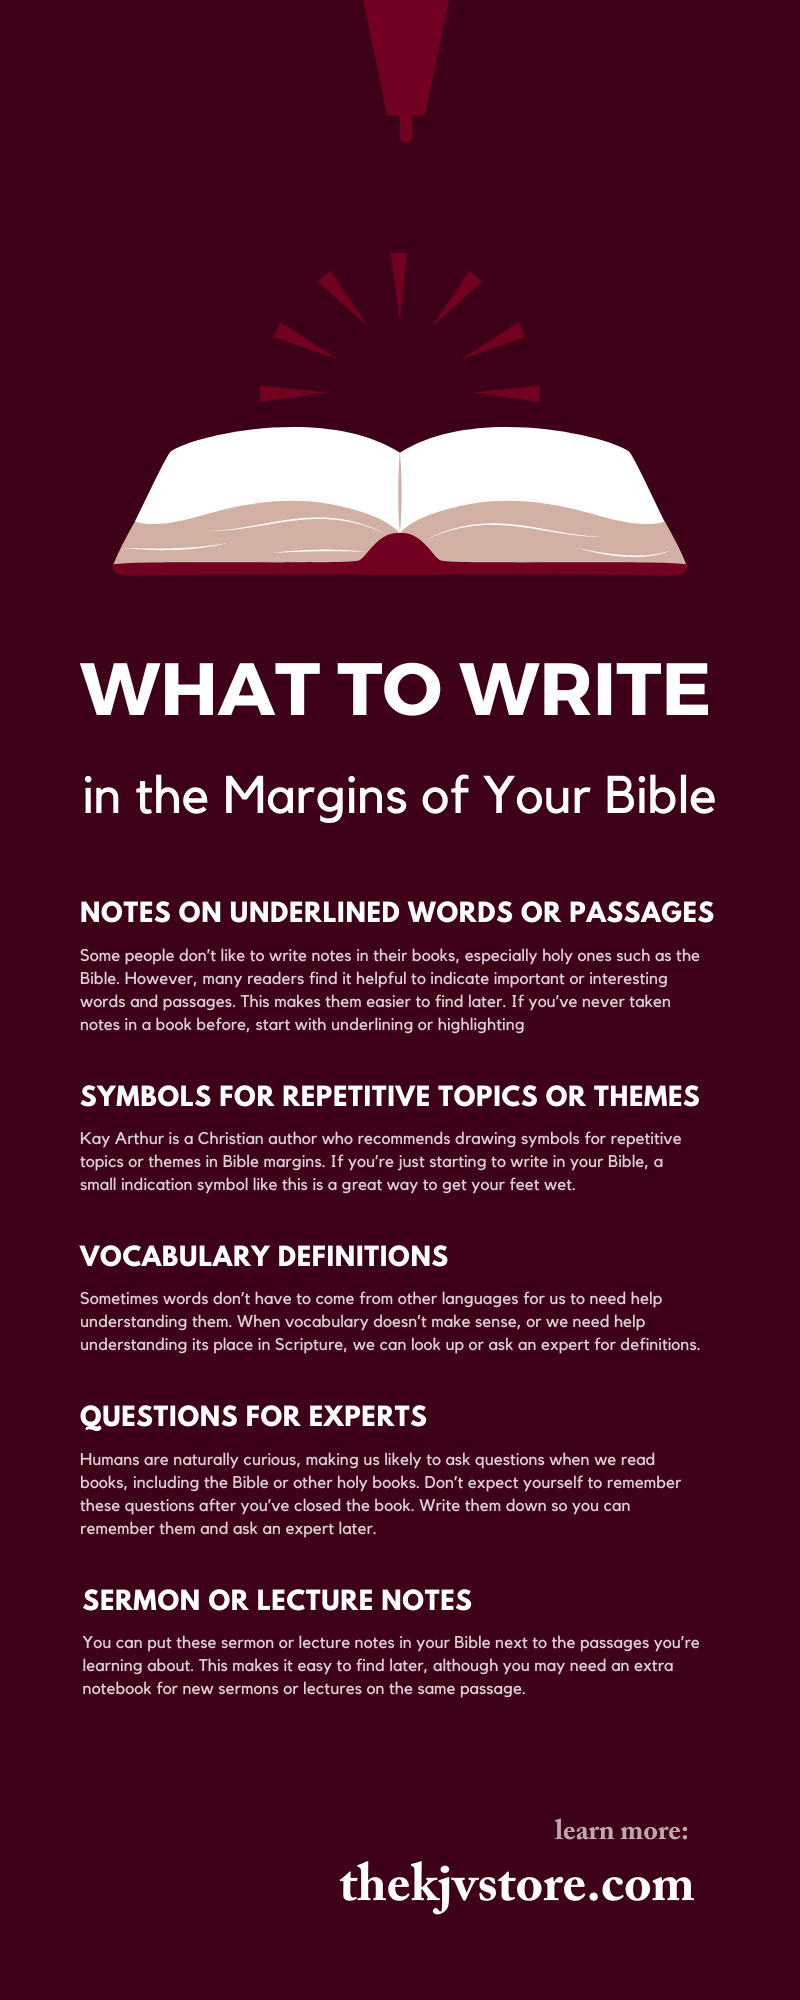 What To Write in the Margins of Your Bible